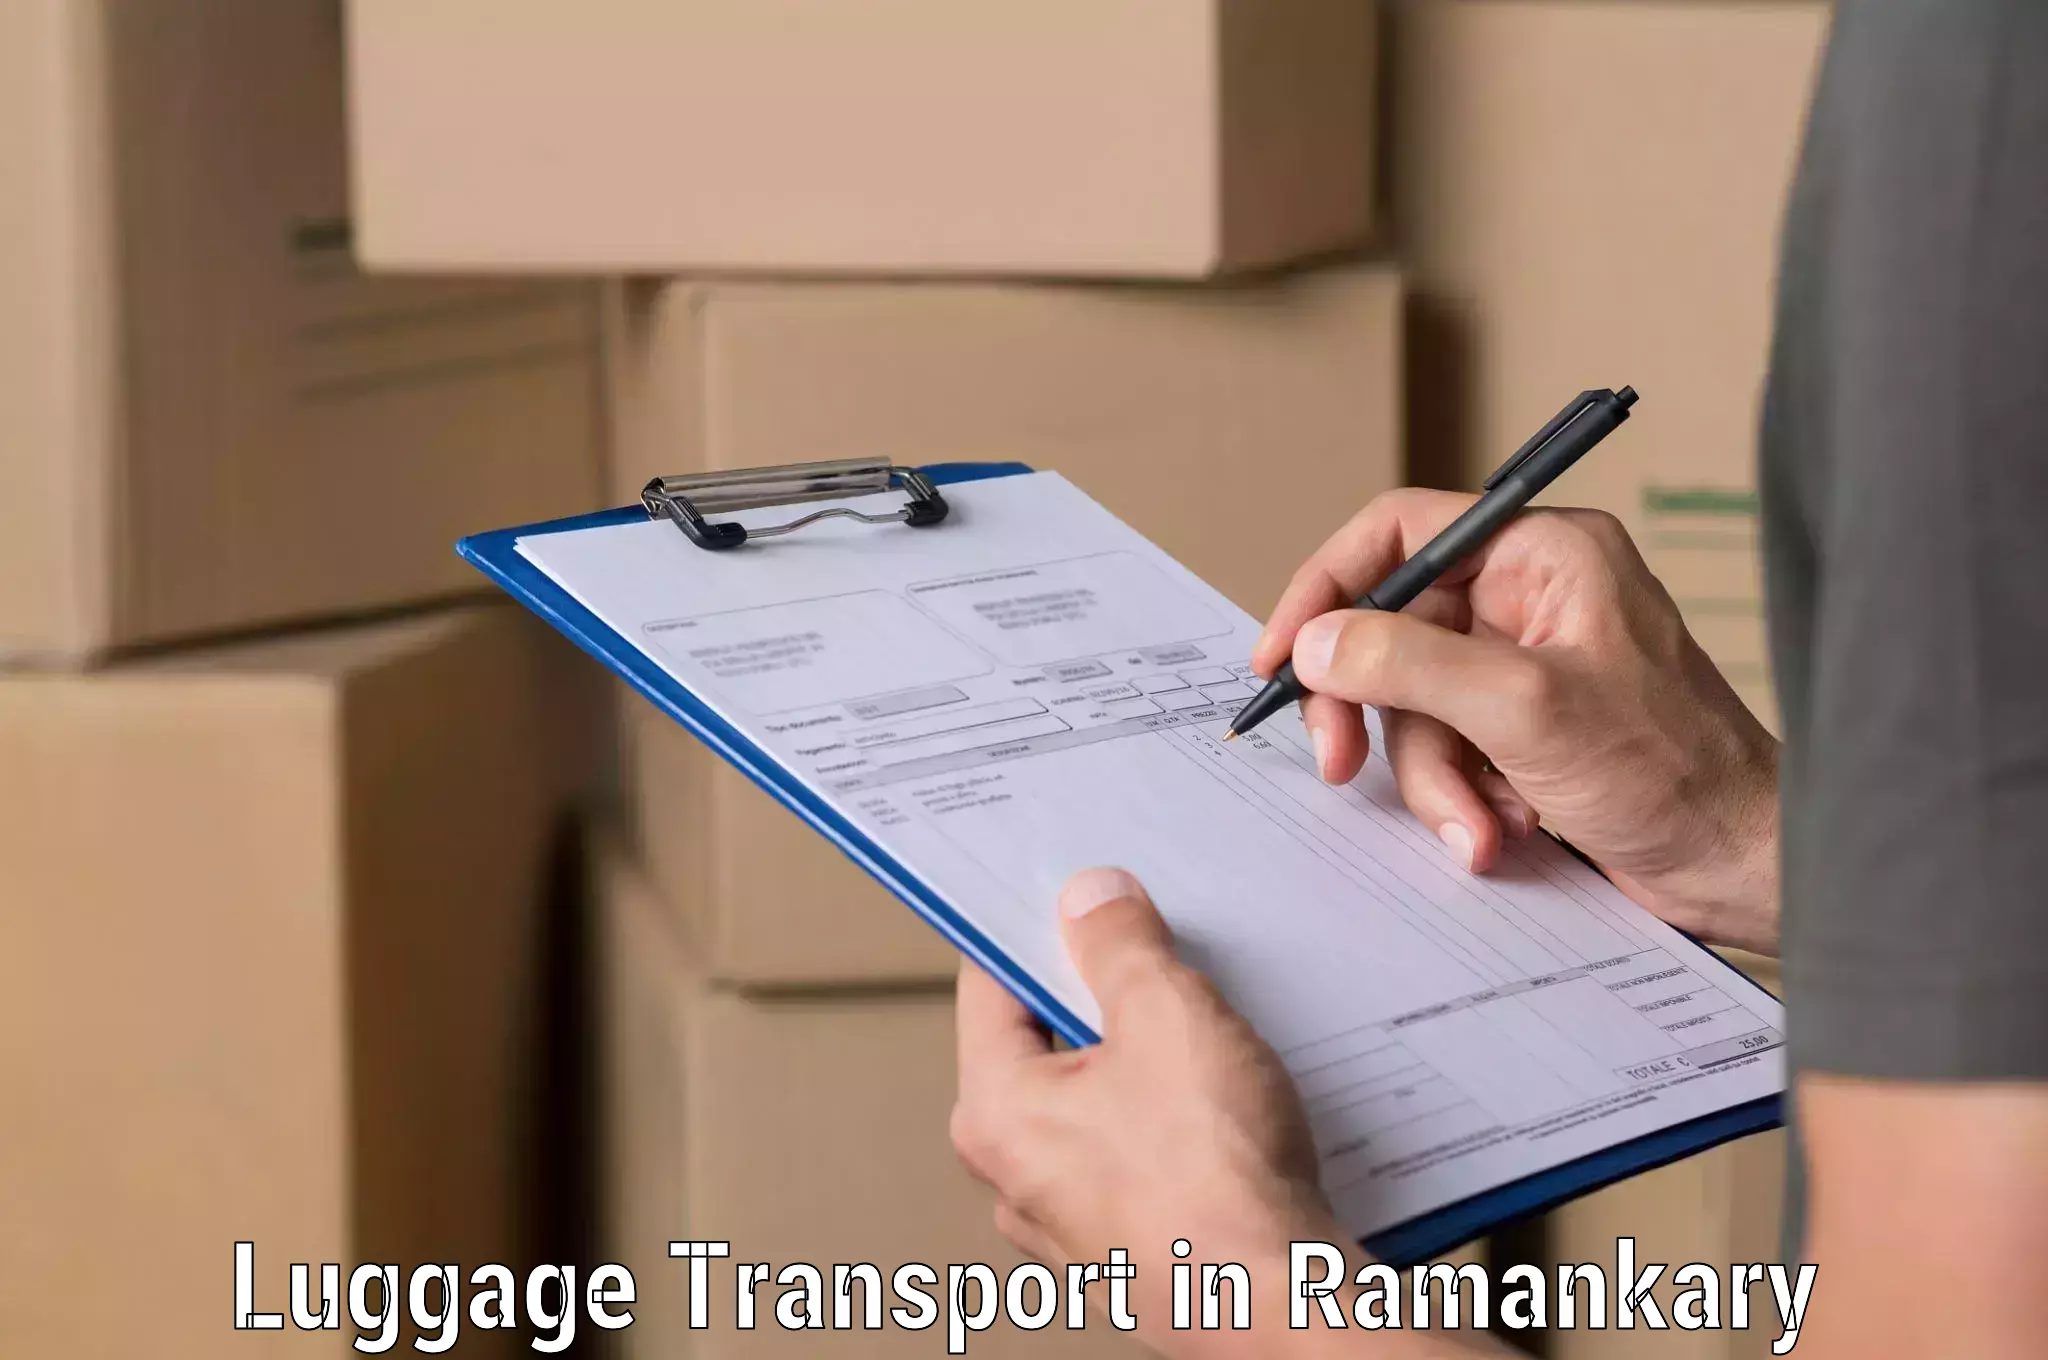 Luggage delivery logistics in Ramankary